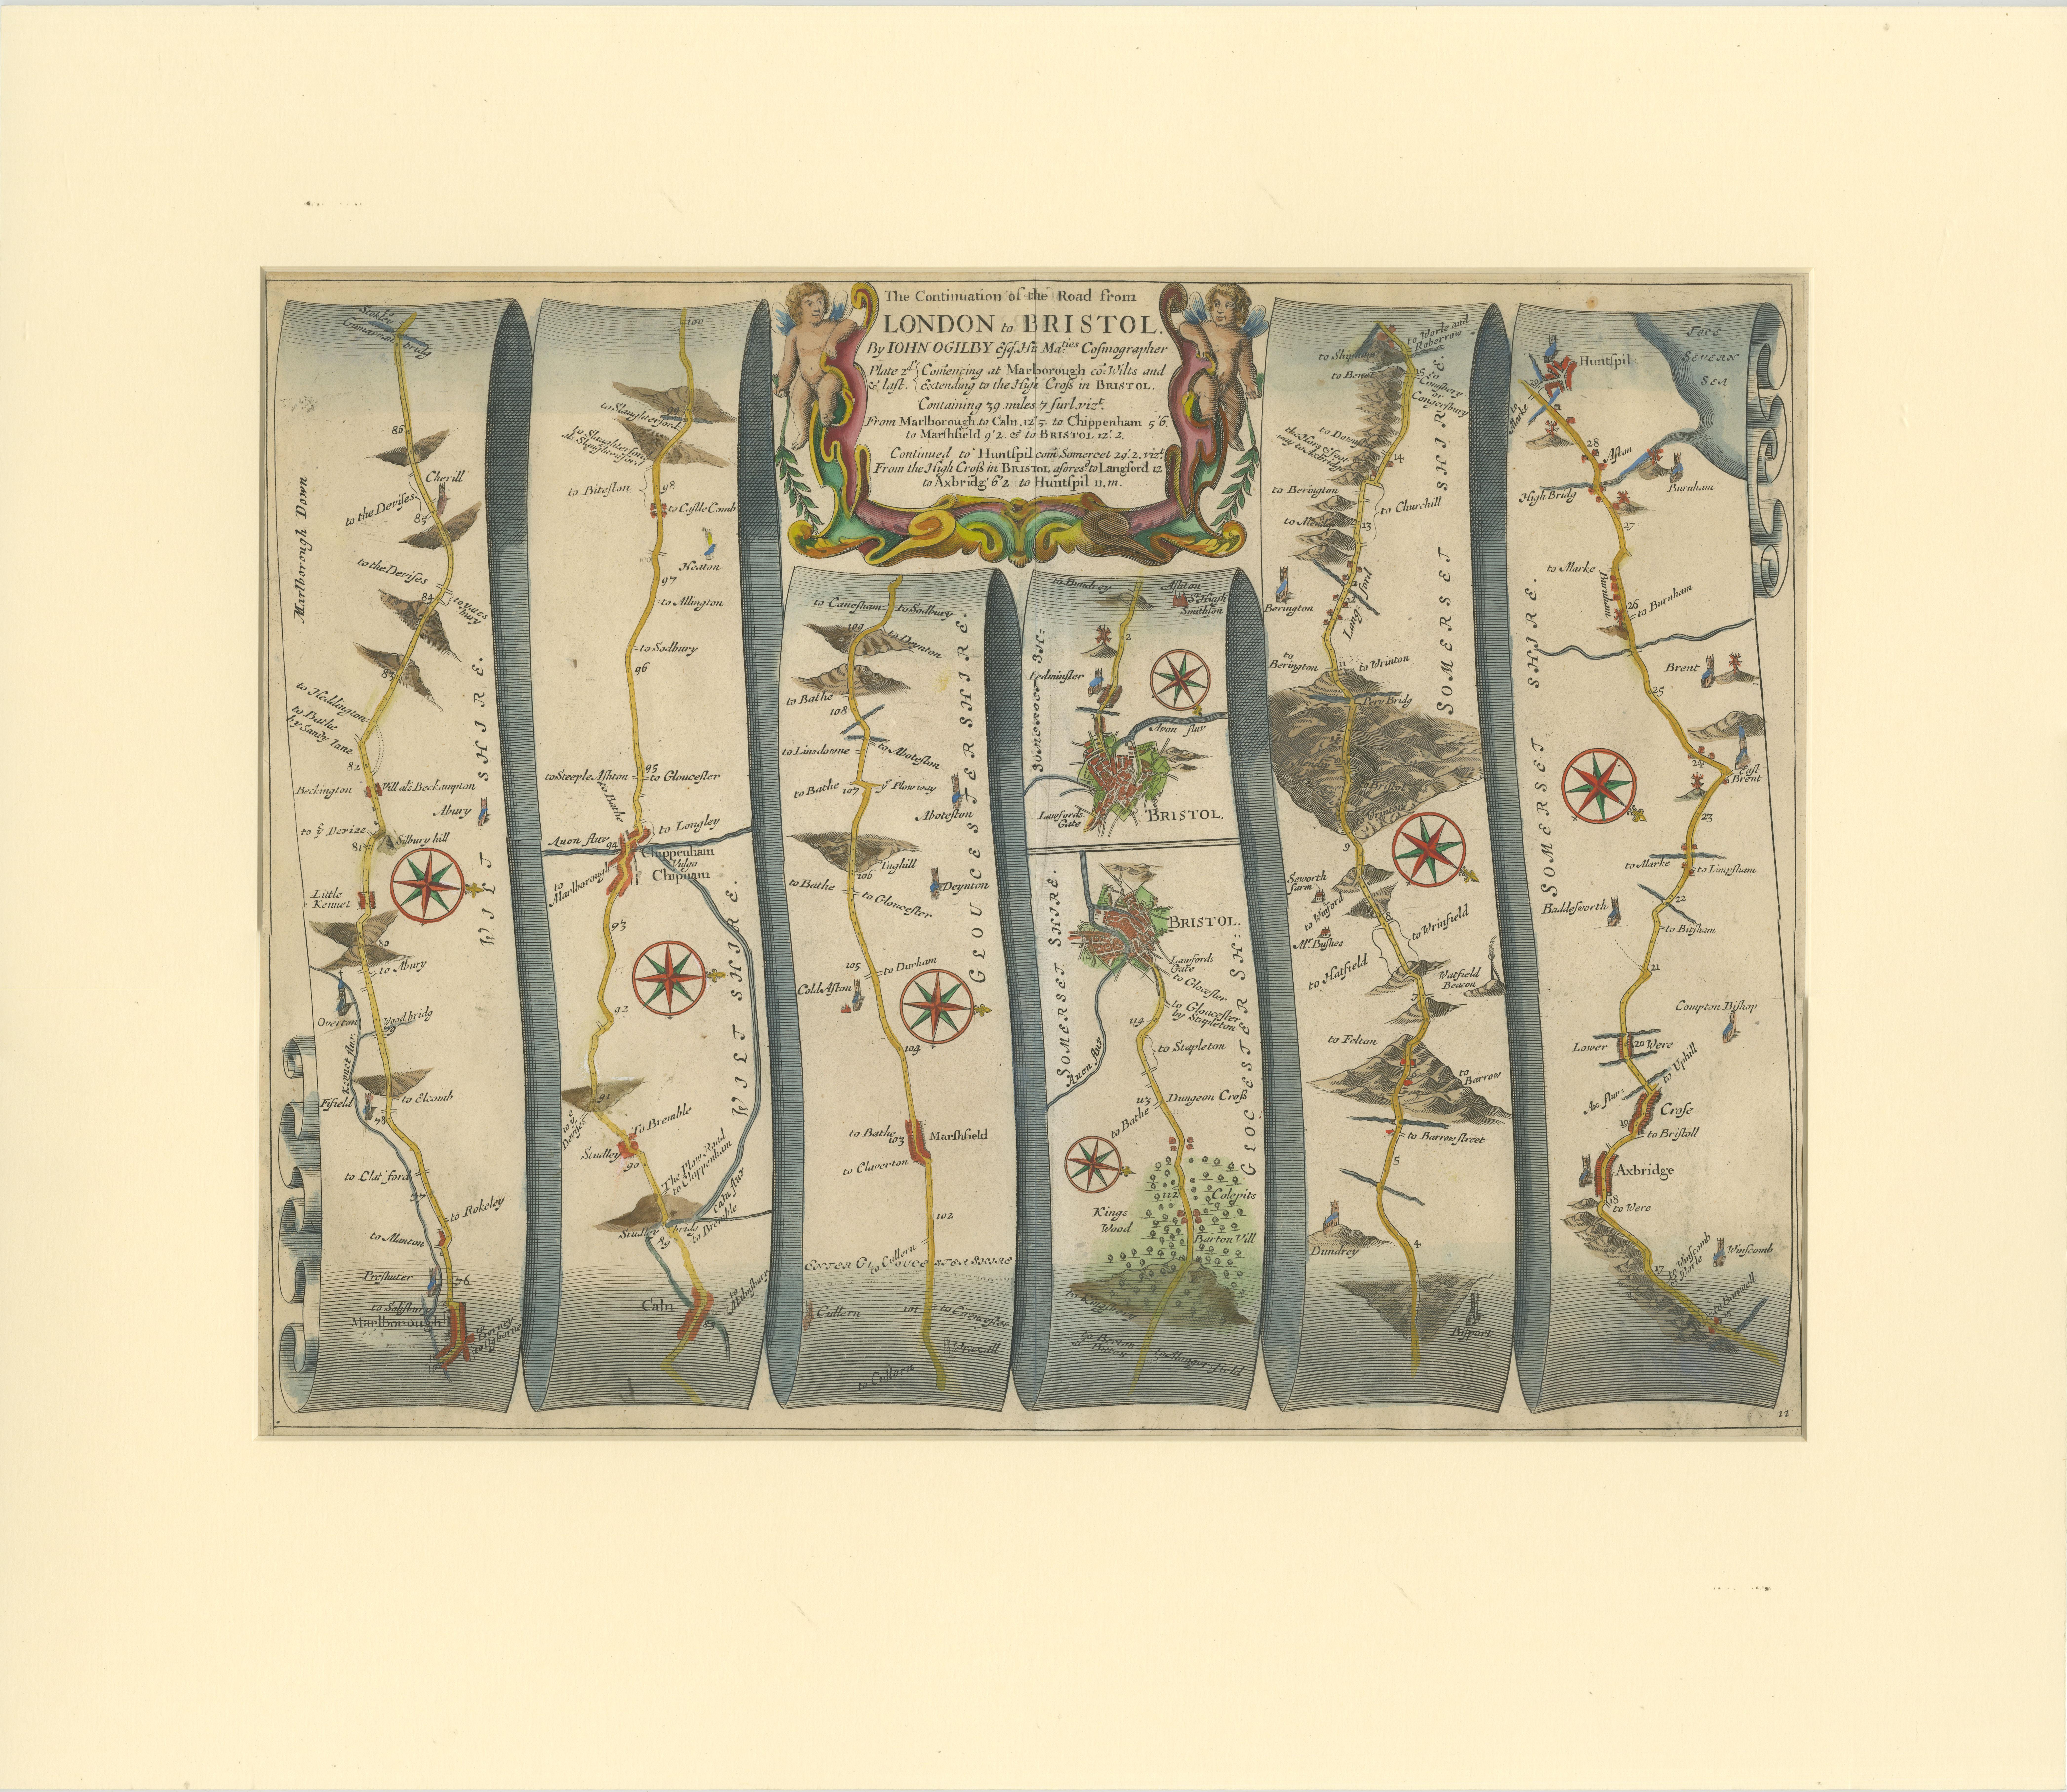 Antique map titled 'The Continuation of the Road from London to Bristol (..)'. A strip map of the continuation of the road from London to Bristol, this particular sheet showing the route from Marlborough to Huntspil. Bristol is depicted at centre,